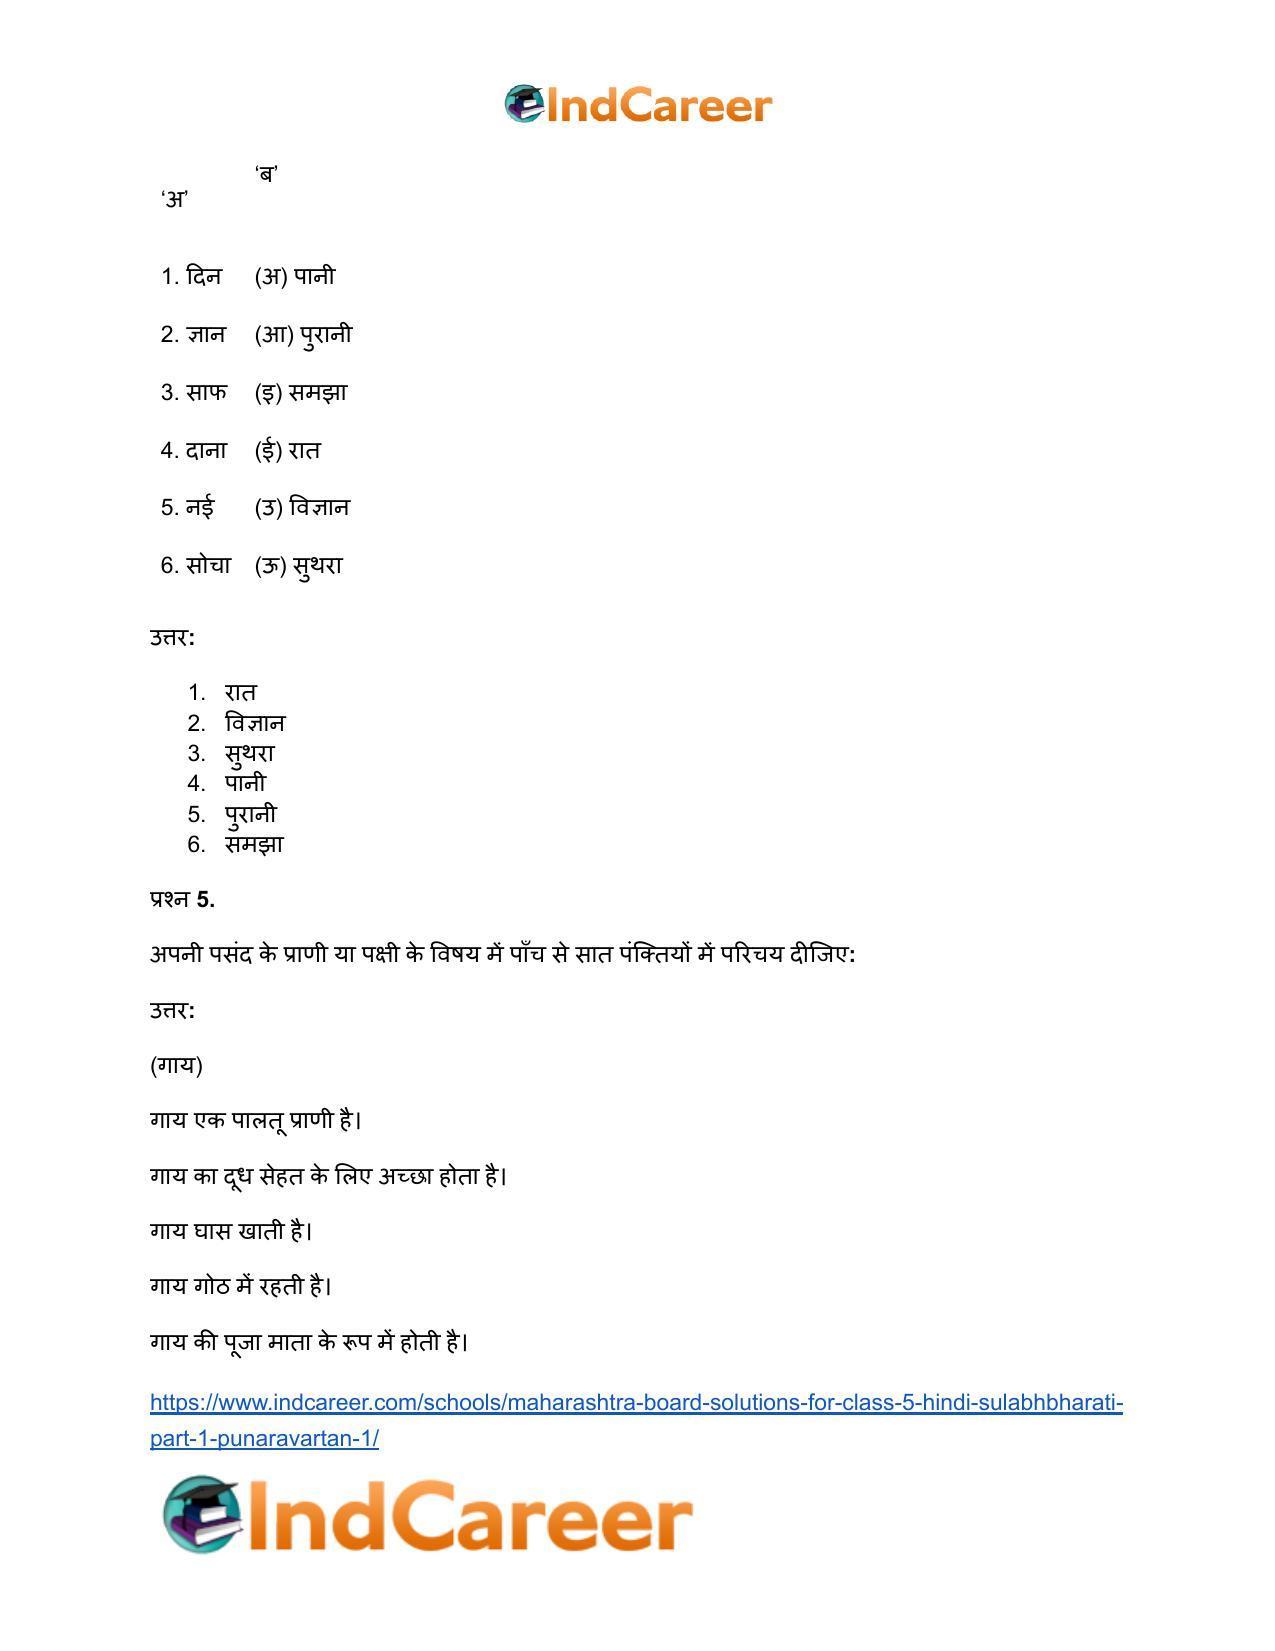 Maharashtra Board Solutions for Class 5- Hindi Sulabhbharati (Part 1): पुनरावर्तन १ - Page 6